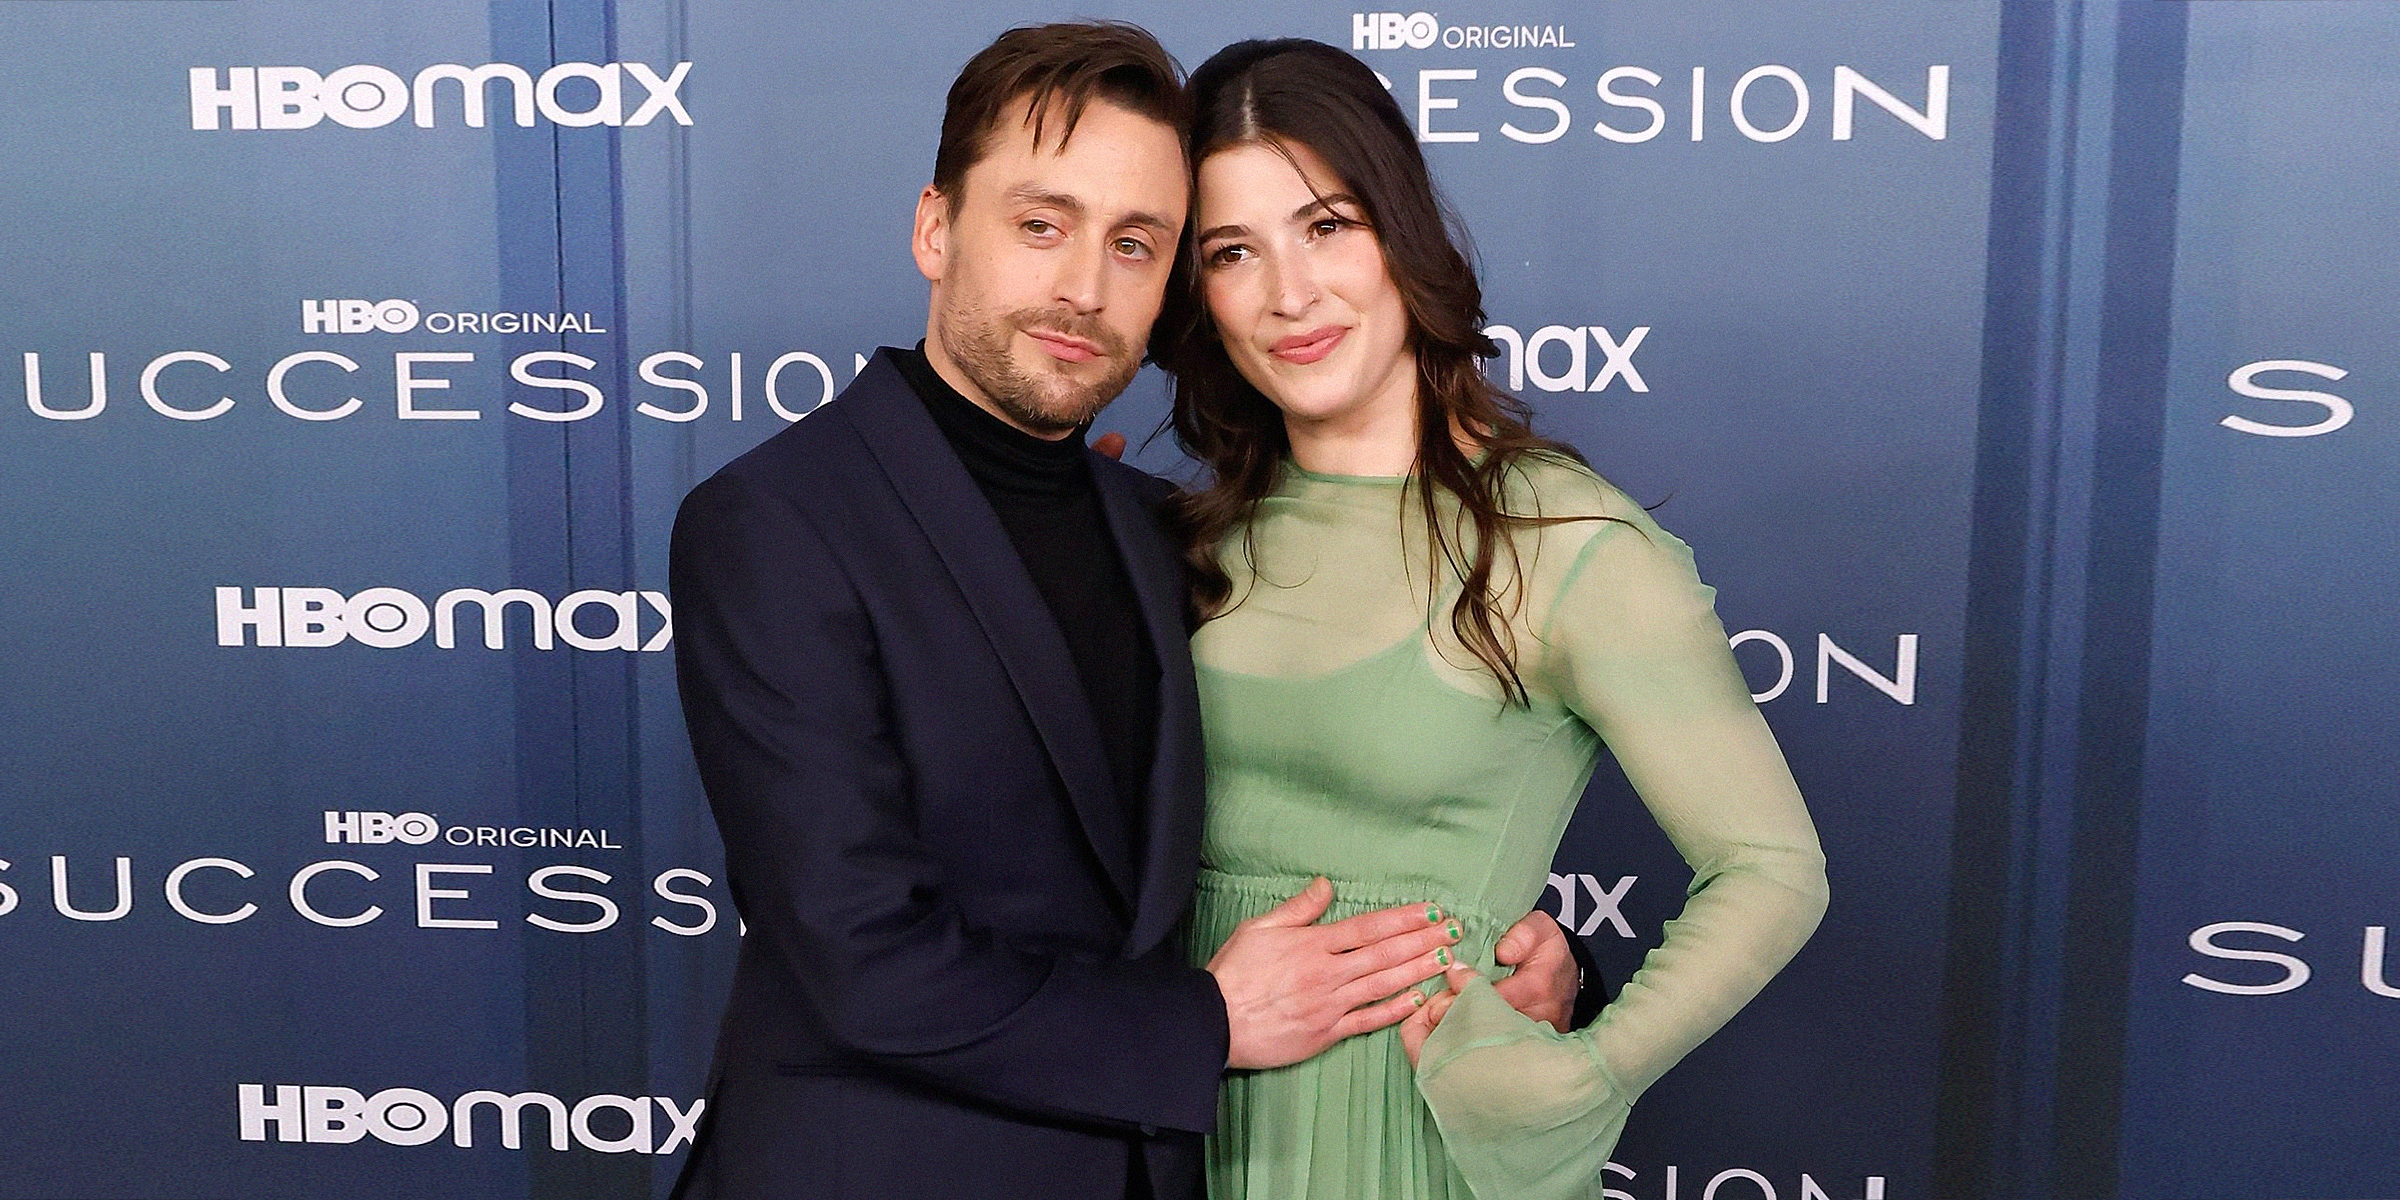 Kieran Culkin and Jazz Charton at the Season 4 premiere of HBO's "Succession" at Jazz at Lincoln Center on March 20, 2023, in New York City. | Source: Getty Images